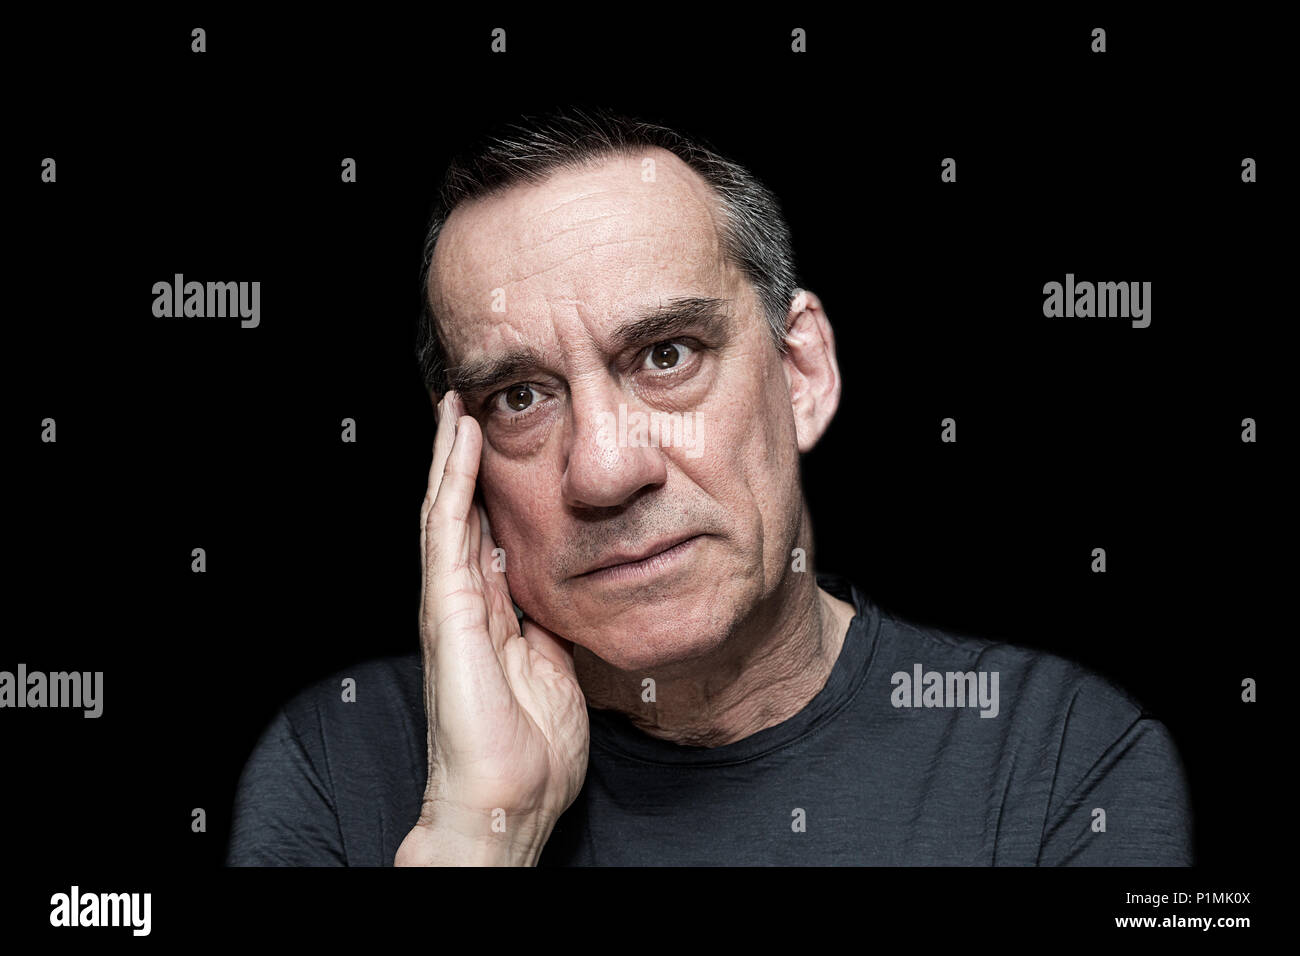 Closeup High Contrast Portrait of Angry Frustrated Man on Black Background Stock Photo